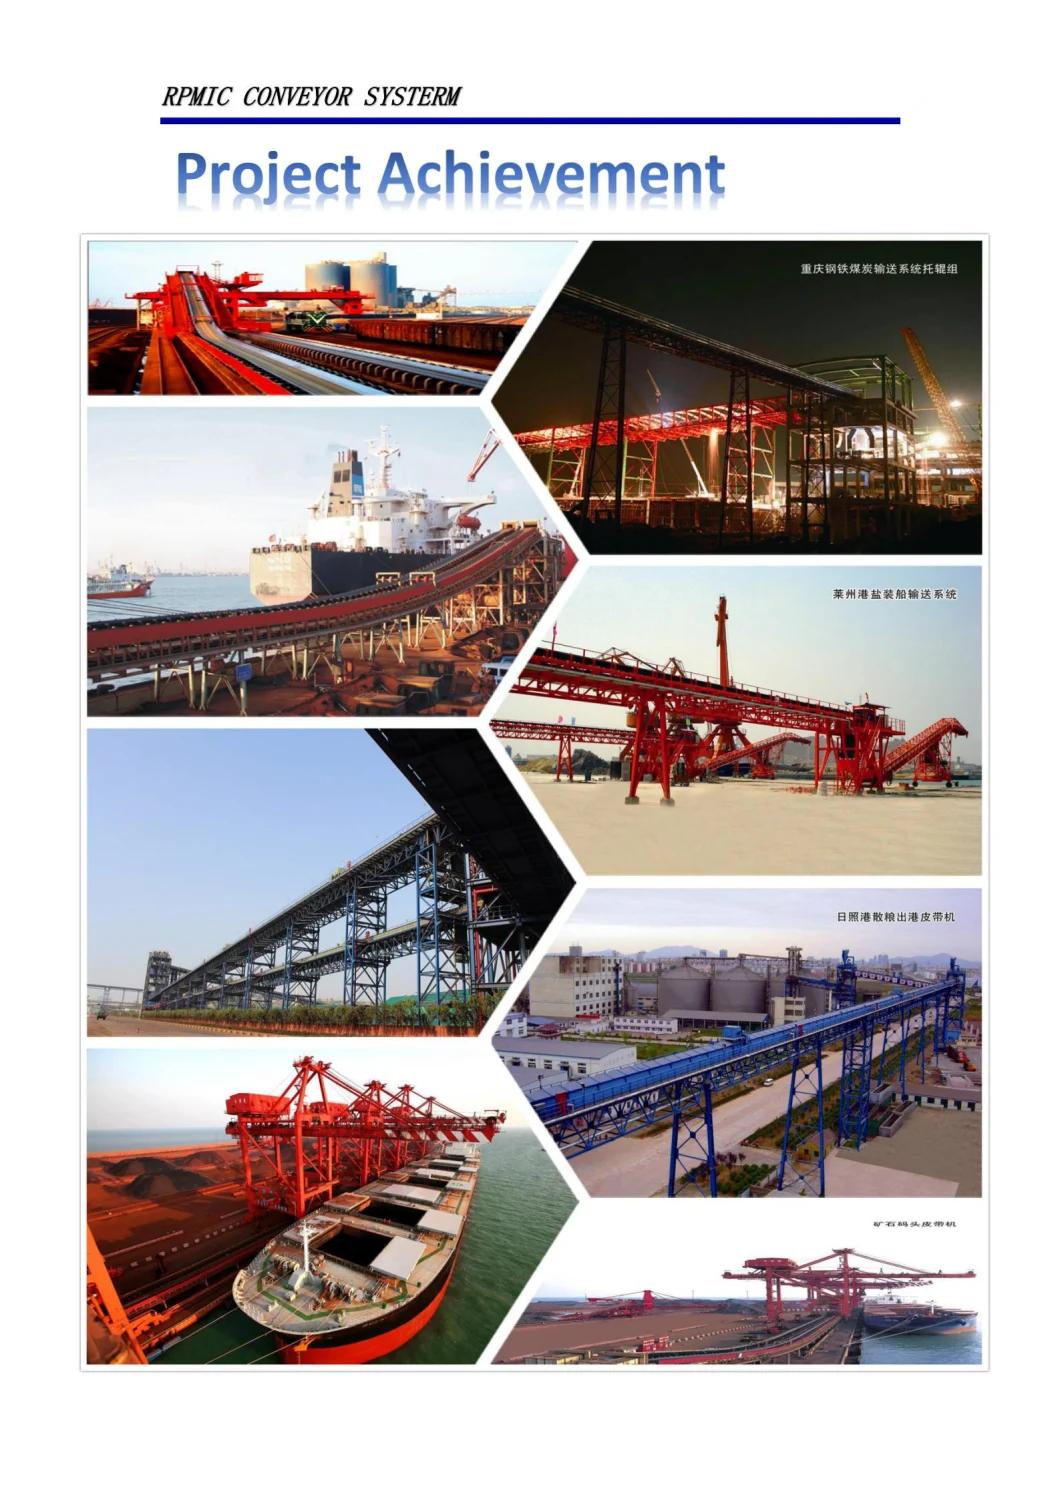 China Made Galvanized Roller Frame for Mining, Port, Cement Industries